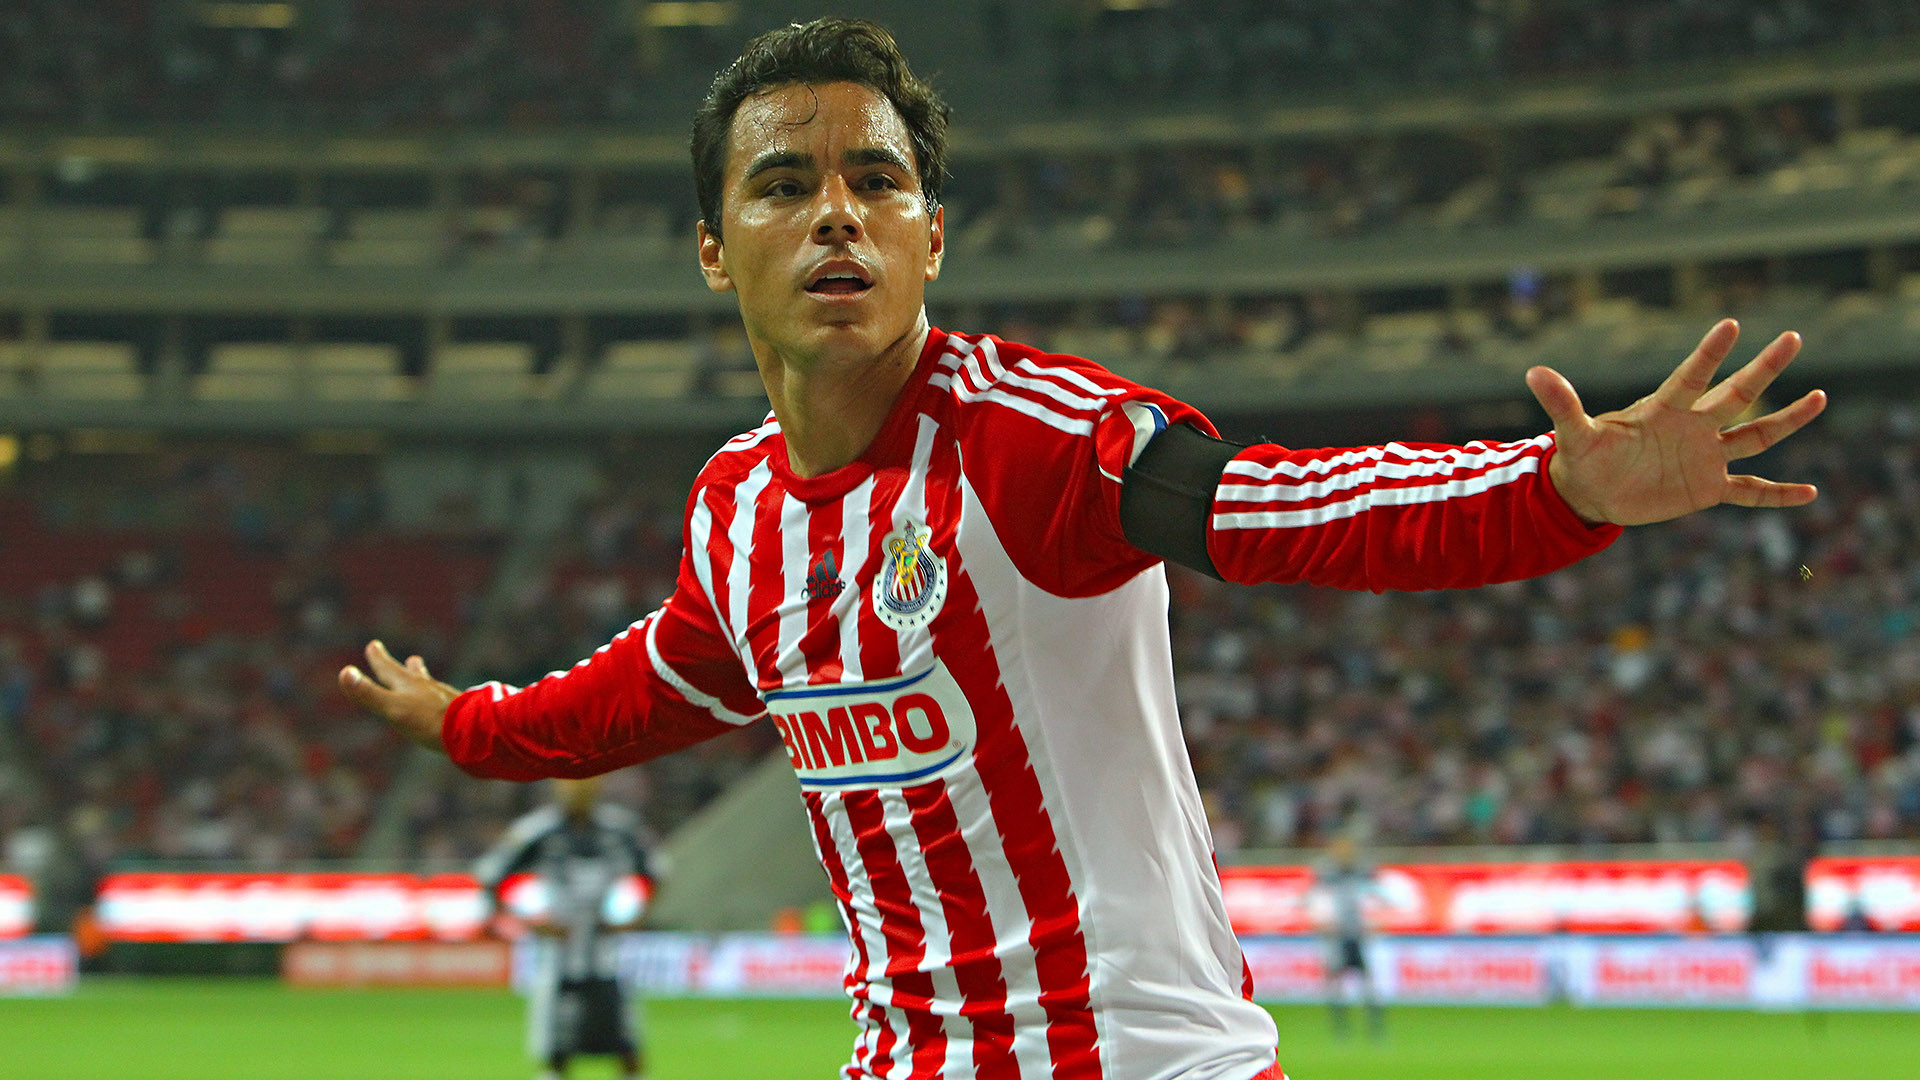 1920x1080 Omar Bravo was back amongst the goals for Chivas this past Sunday